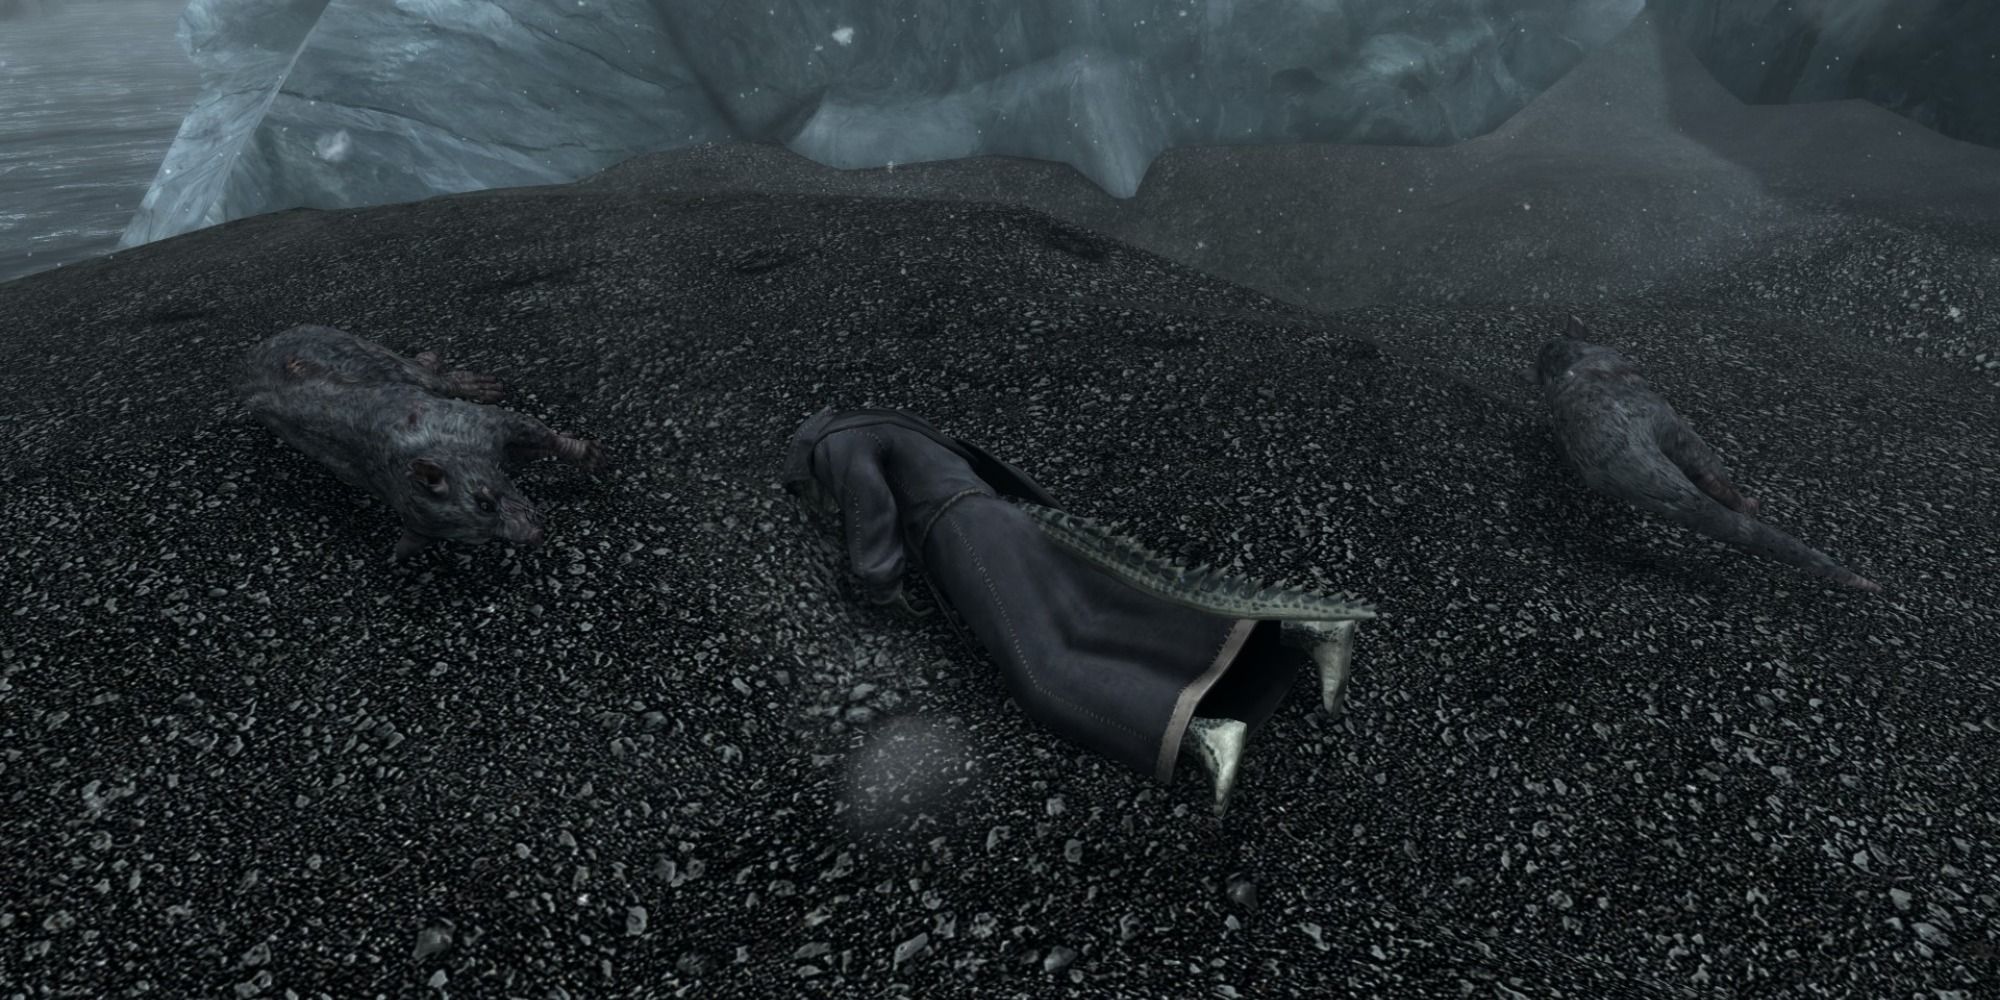 Skyrim screenshot showing Ilas-tei's body with dead skeevers.